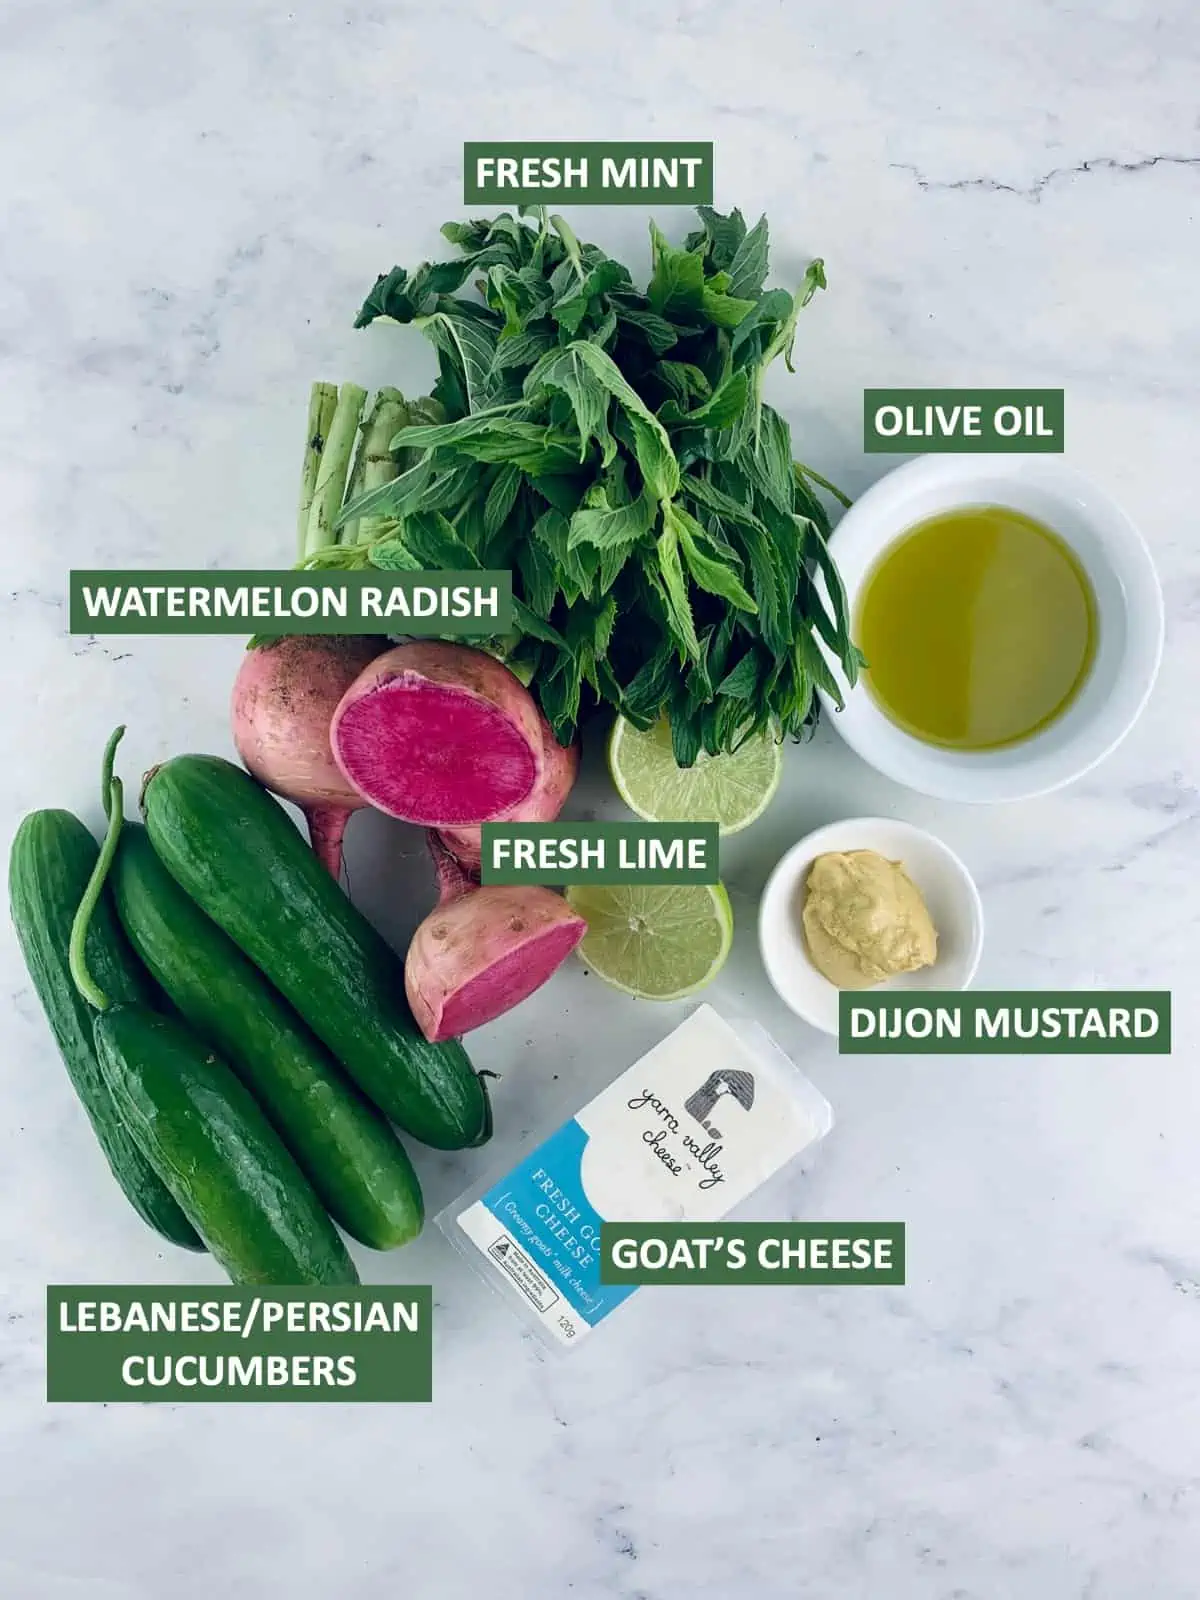 Labelled ingredients needed to make cucumber goat cheese salad.